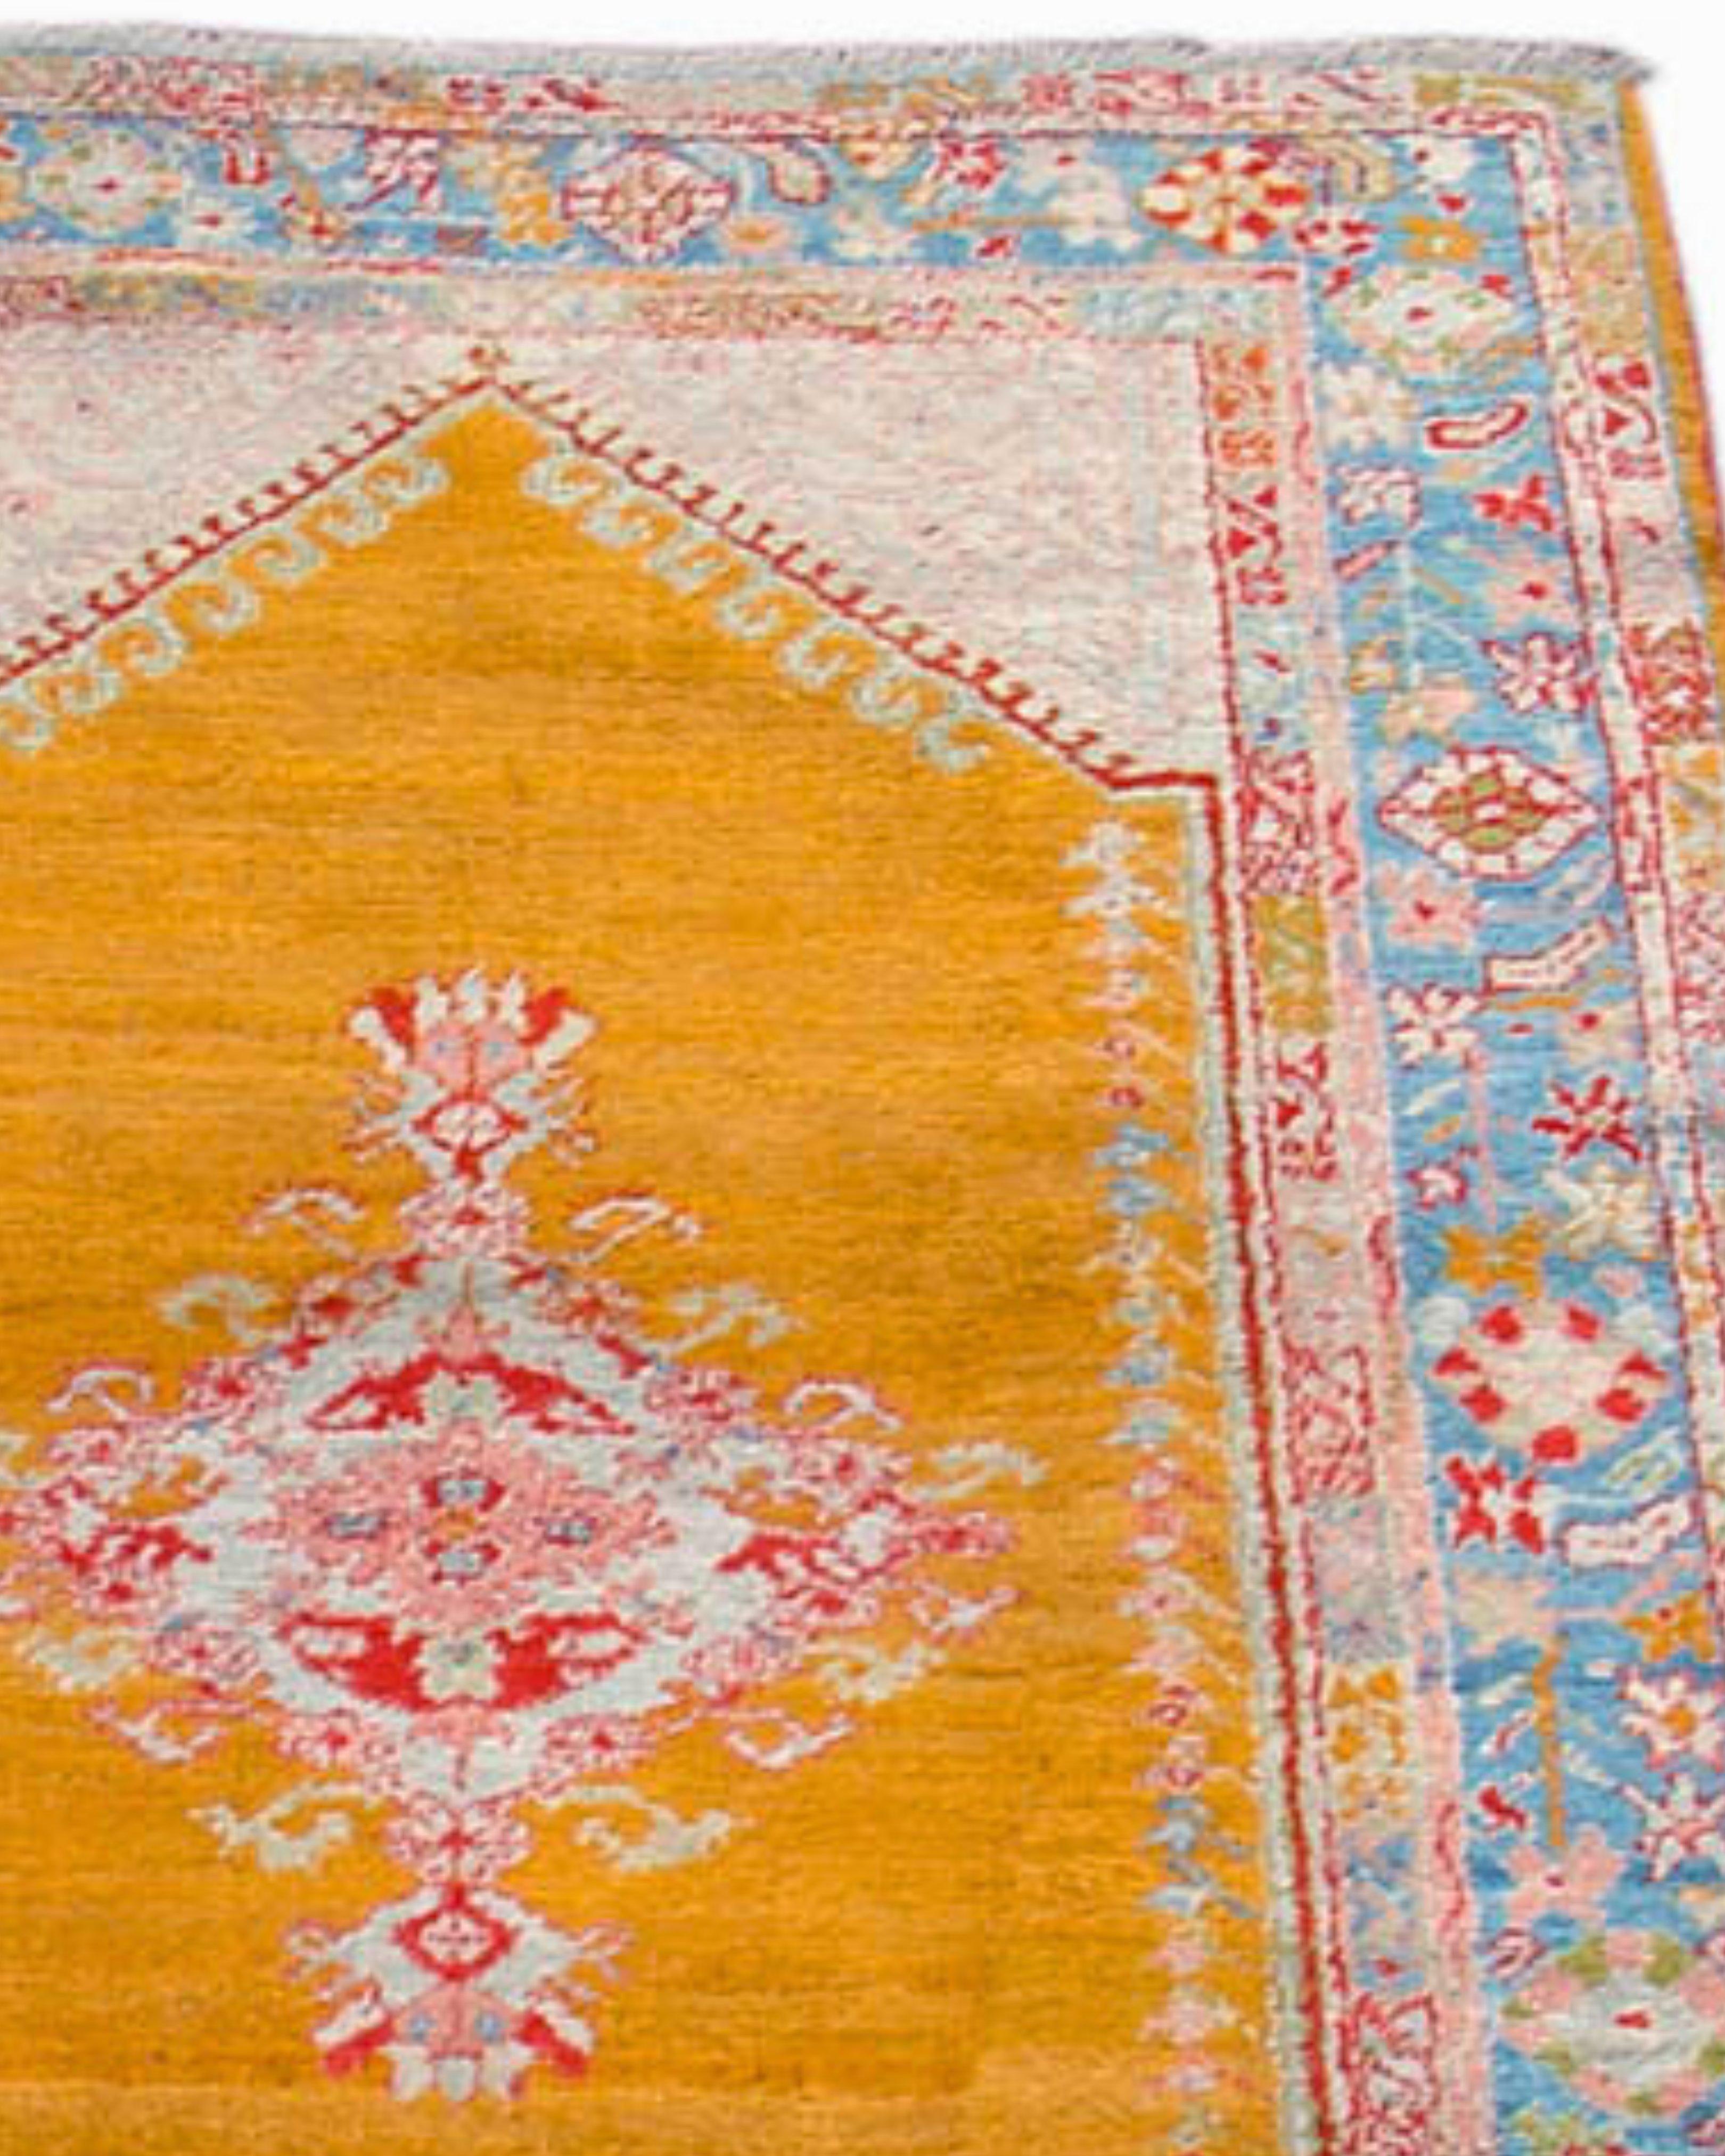 Hand-Woven Antique Angora Oushak Rug with Saffron Yellow Field, Late 19th Century For Sale